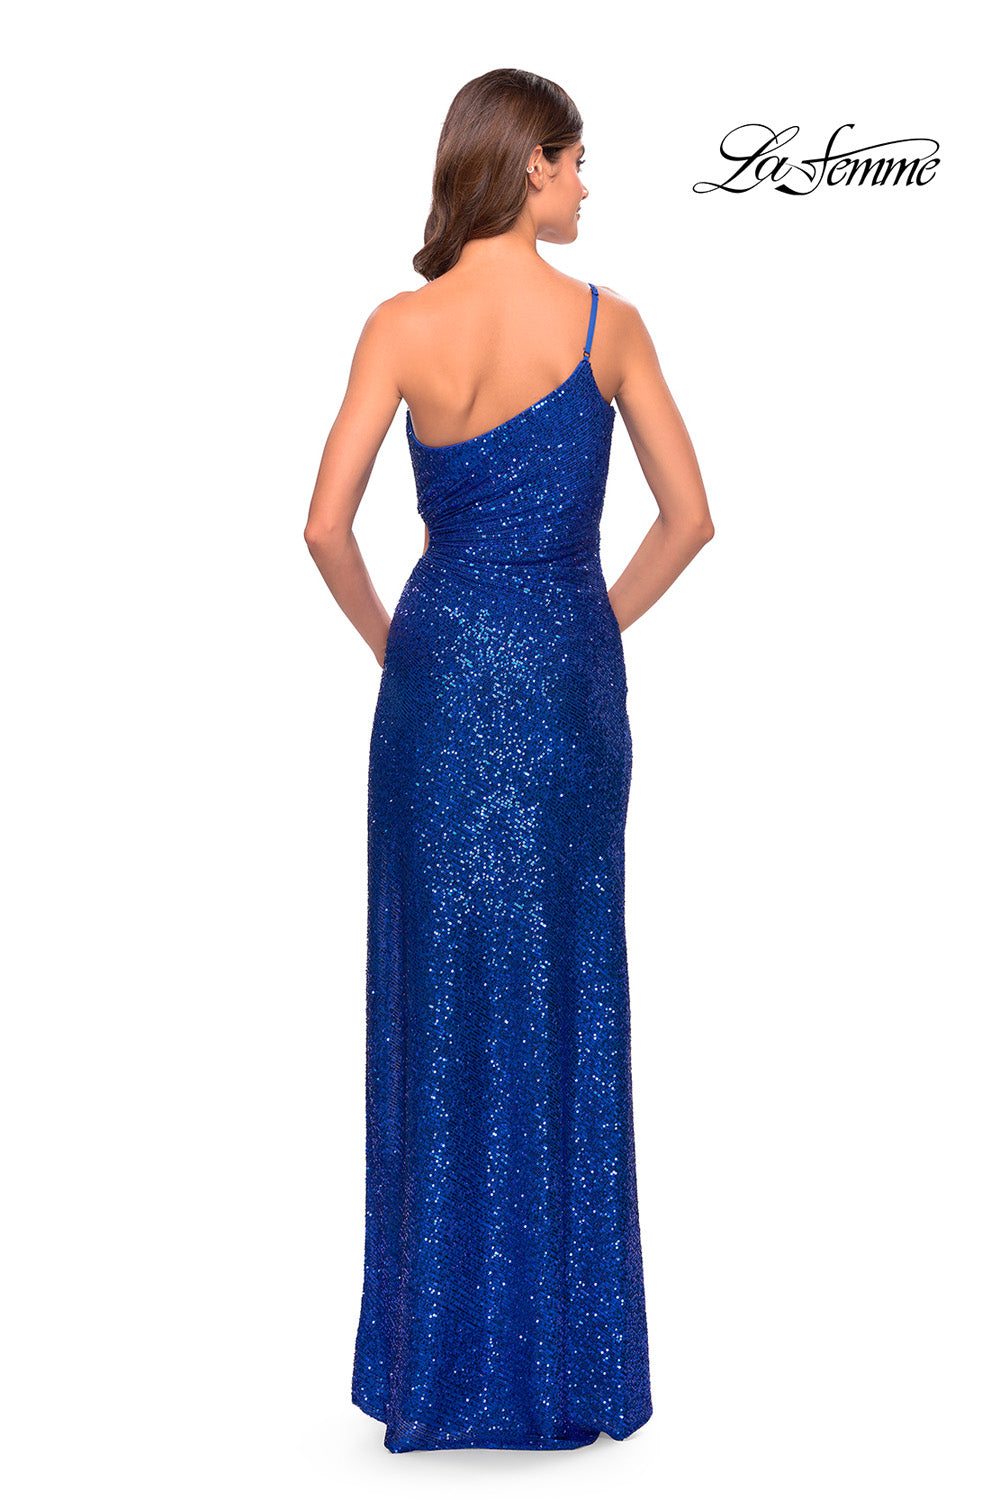 La Femme 31089 prom dress images.  La Femme 31089 is available in these colors: Black, Red, Royal Blue, White.